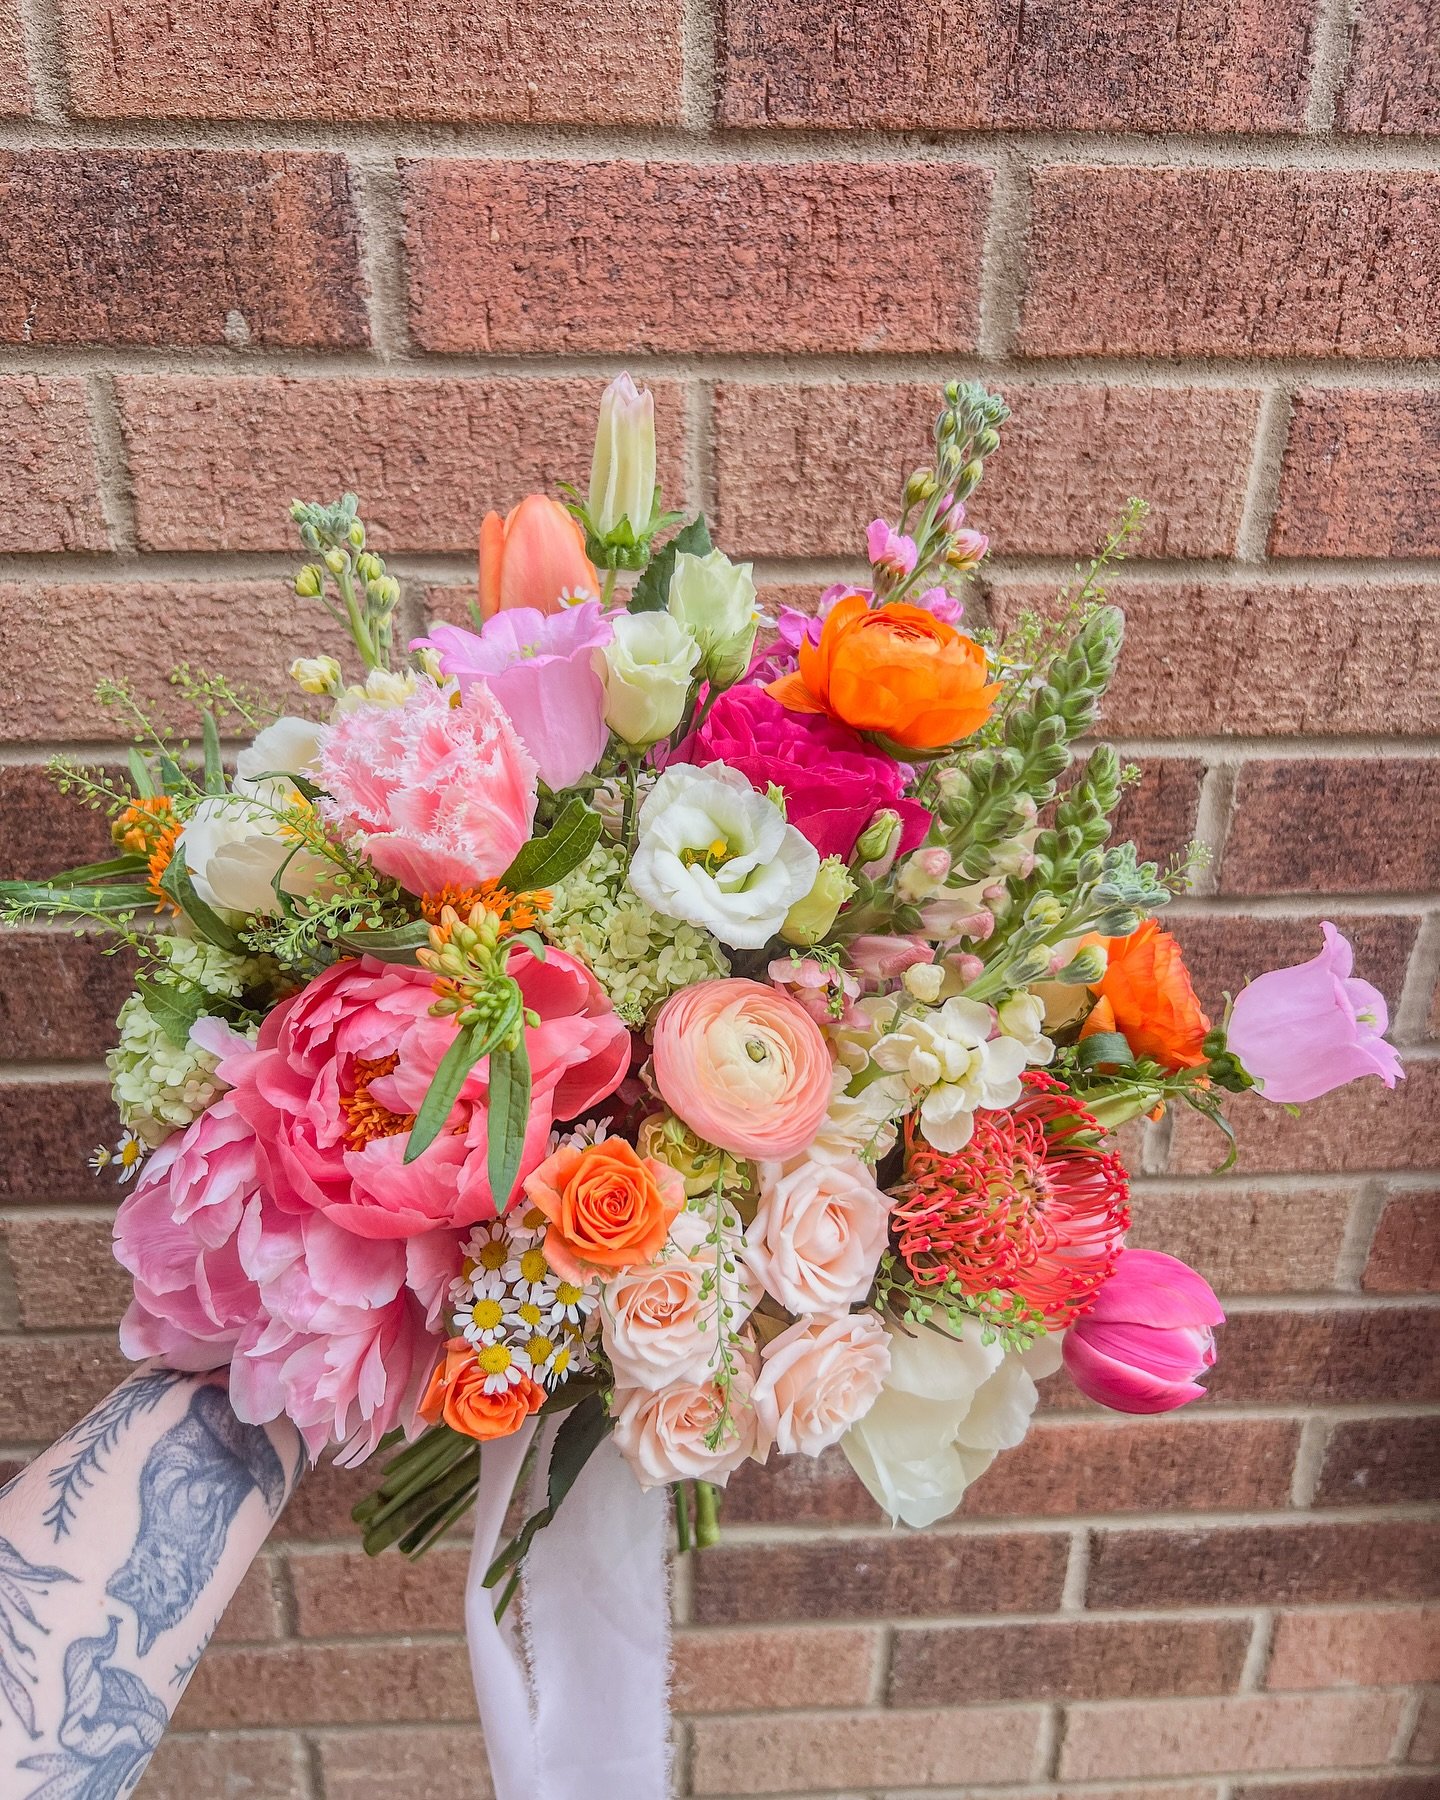 🩷🧡FOR KATE💚💛
.
Filled with so many beautiful flowers in shades of mixed pinks, green, orange, yellow and a pop of peach. Adored this whole wedding so much!
.
Just wish I would have taken a better photo of her bouquet but couldn&rsquo;t not share?